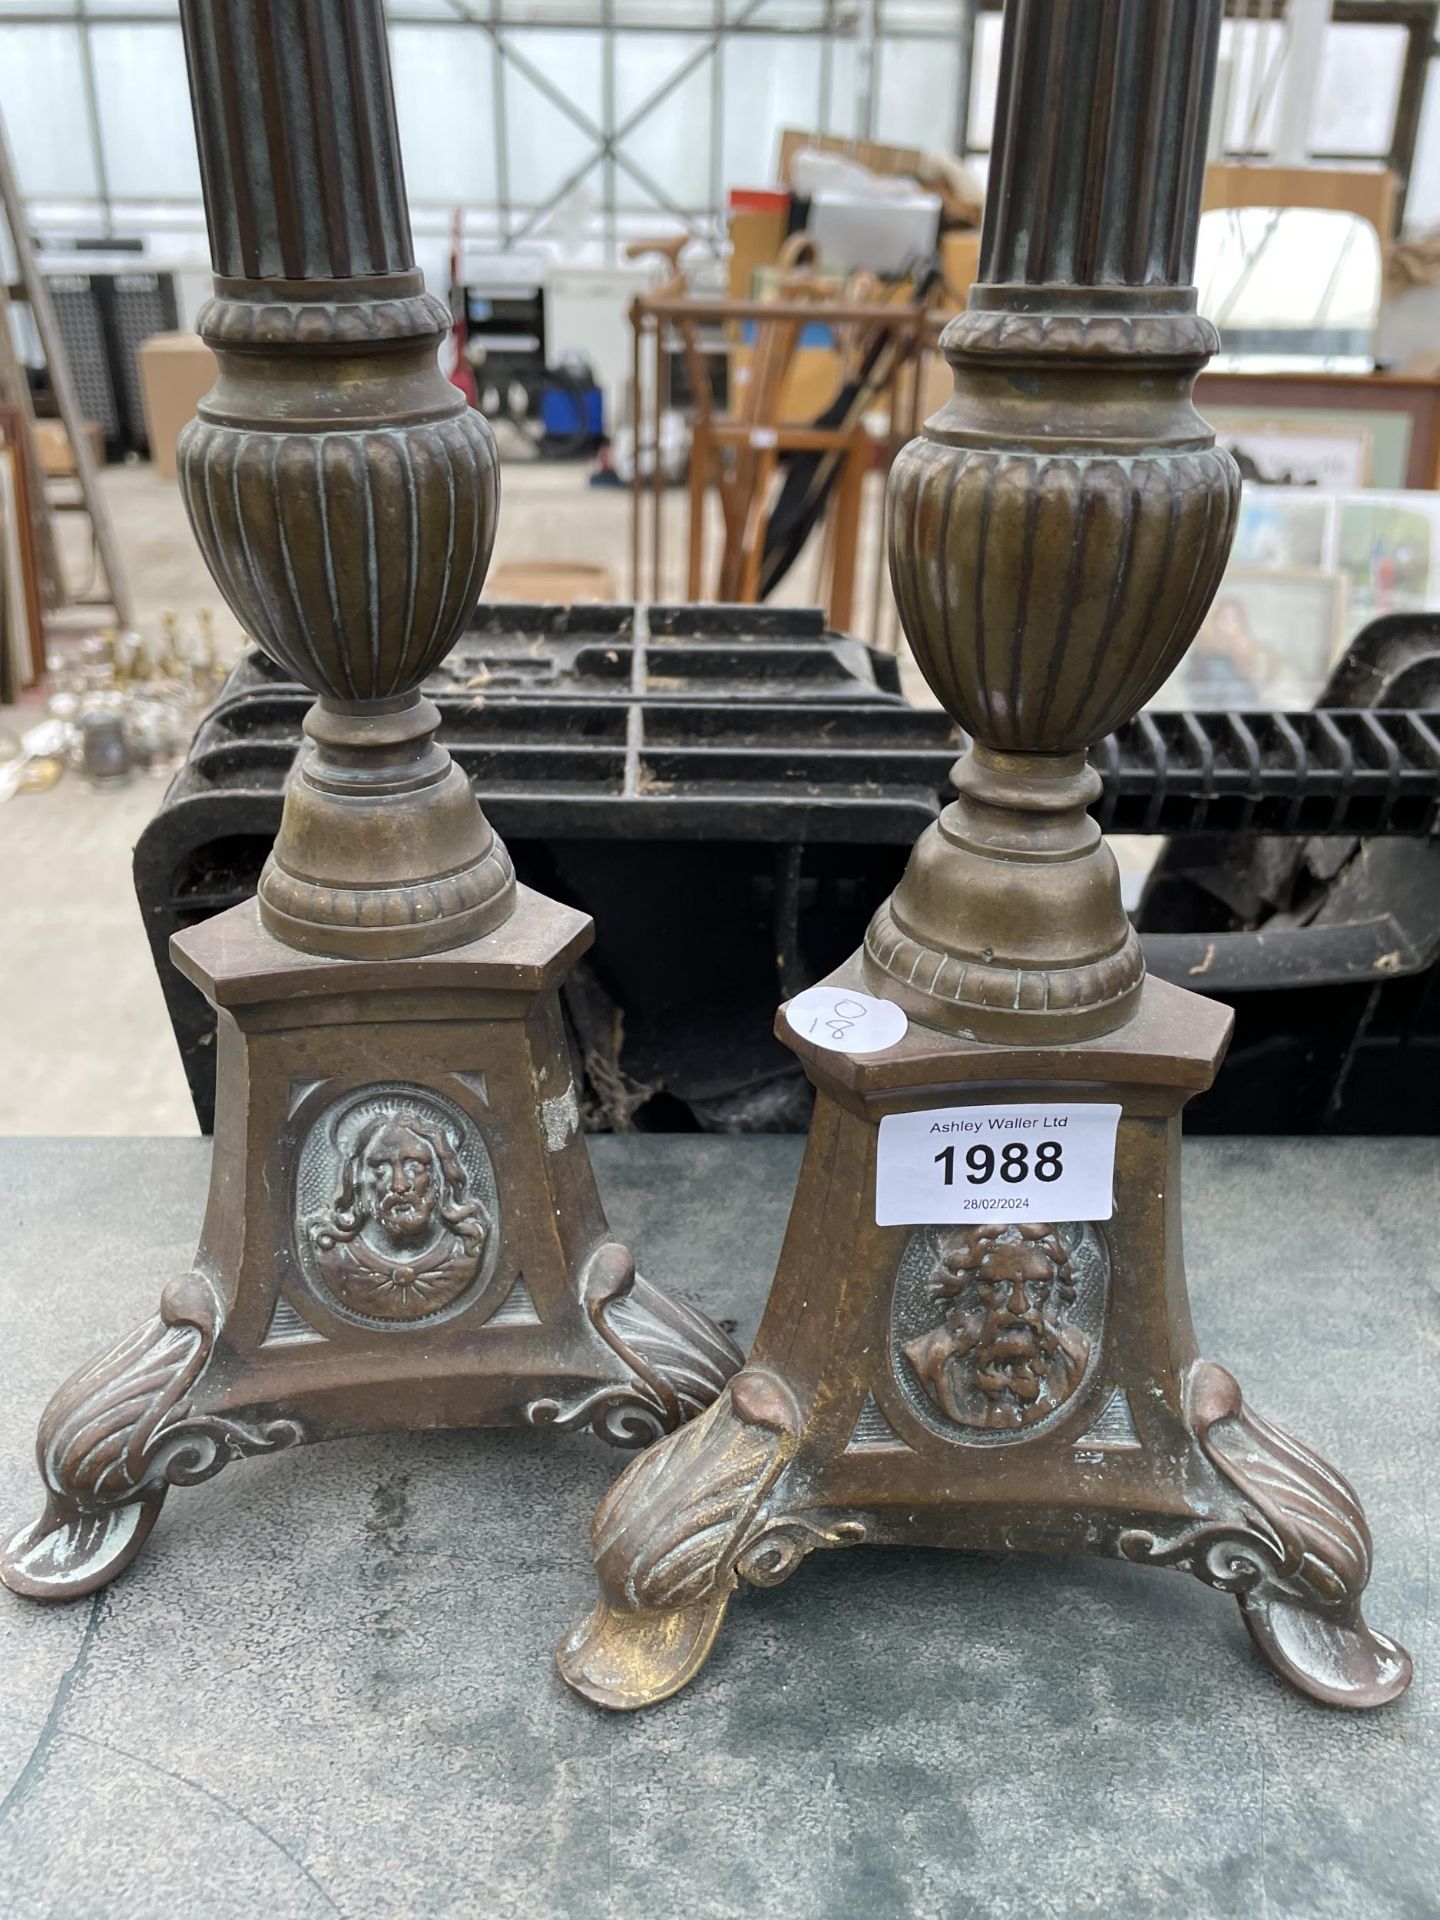 TWO VINTAGE AND DECORATIVE BRASS CANDLE STICKS - Image 2 of 3